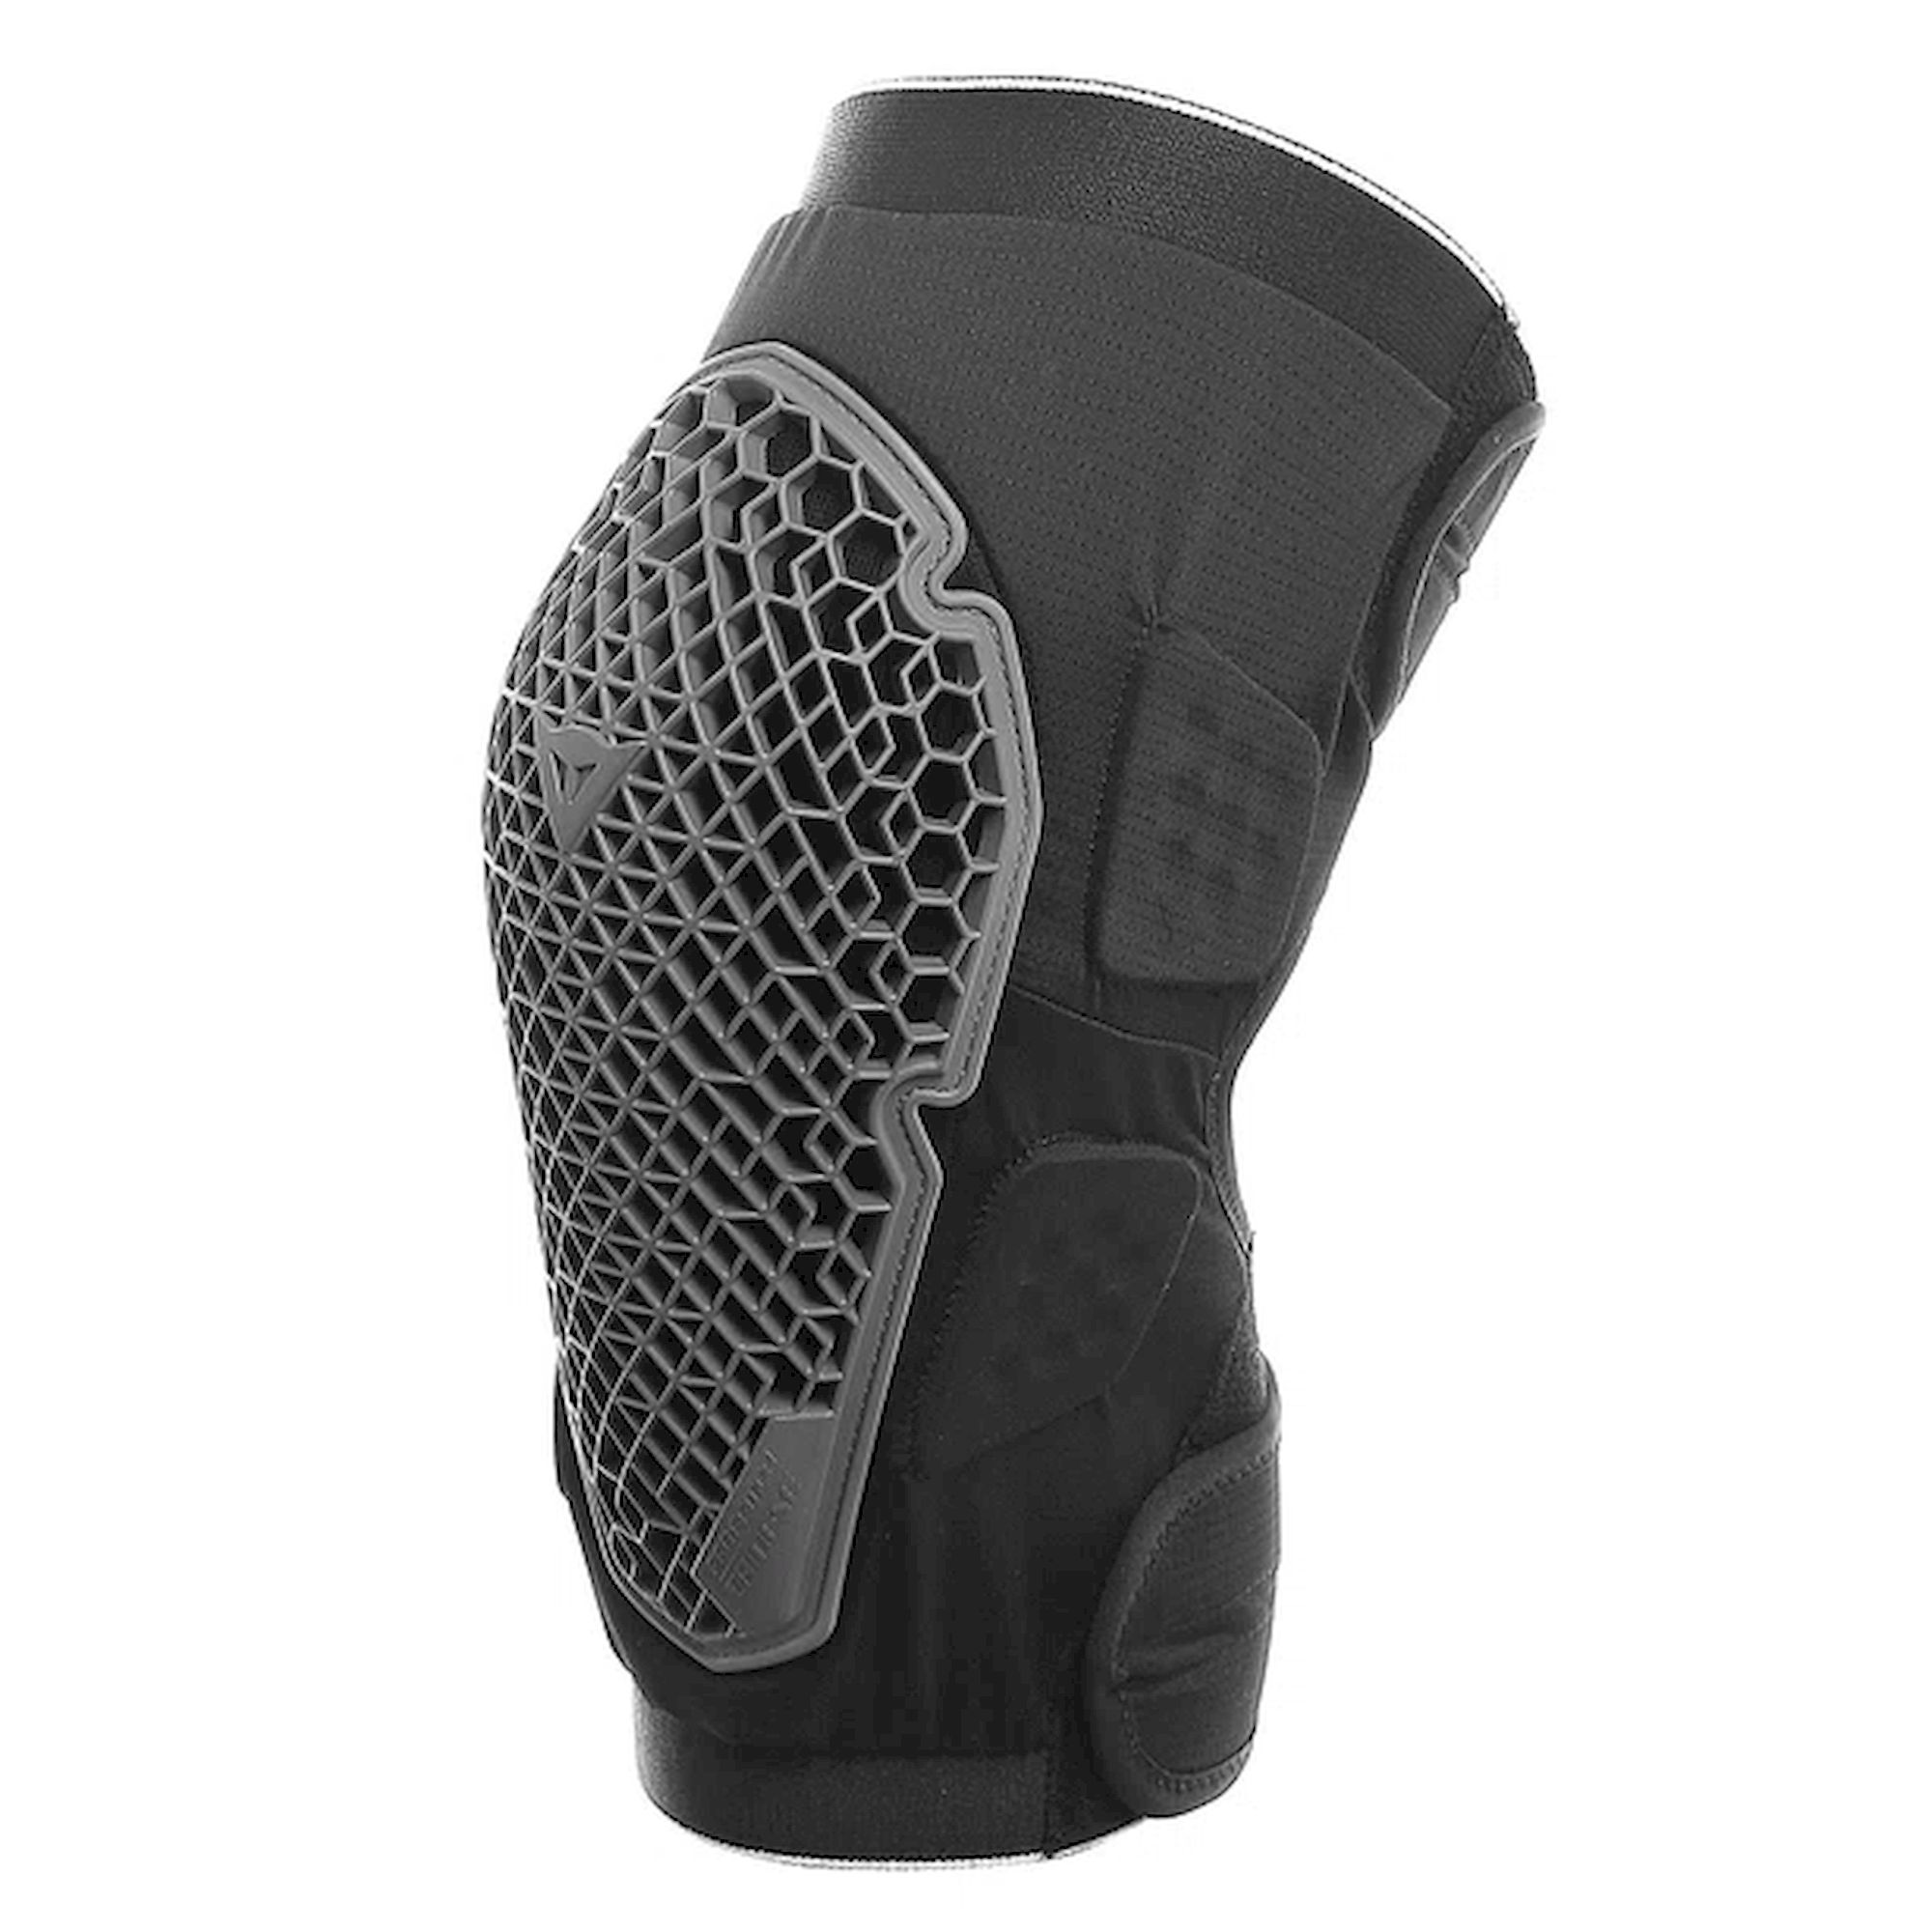 Dainese Pro Armor Knee Guard - Ginocchiere MTB | Hardloop